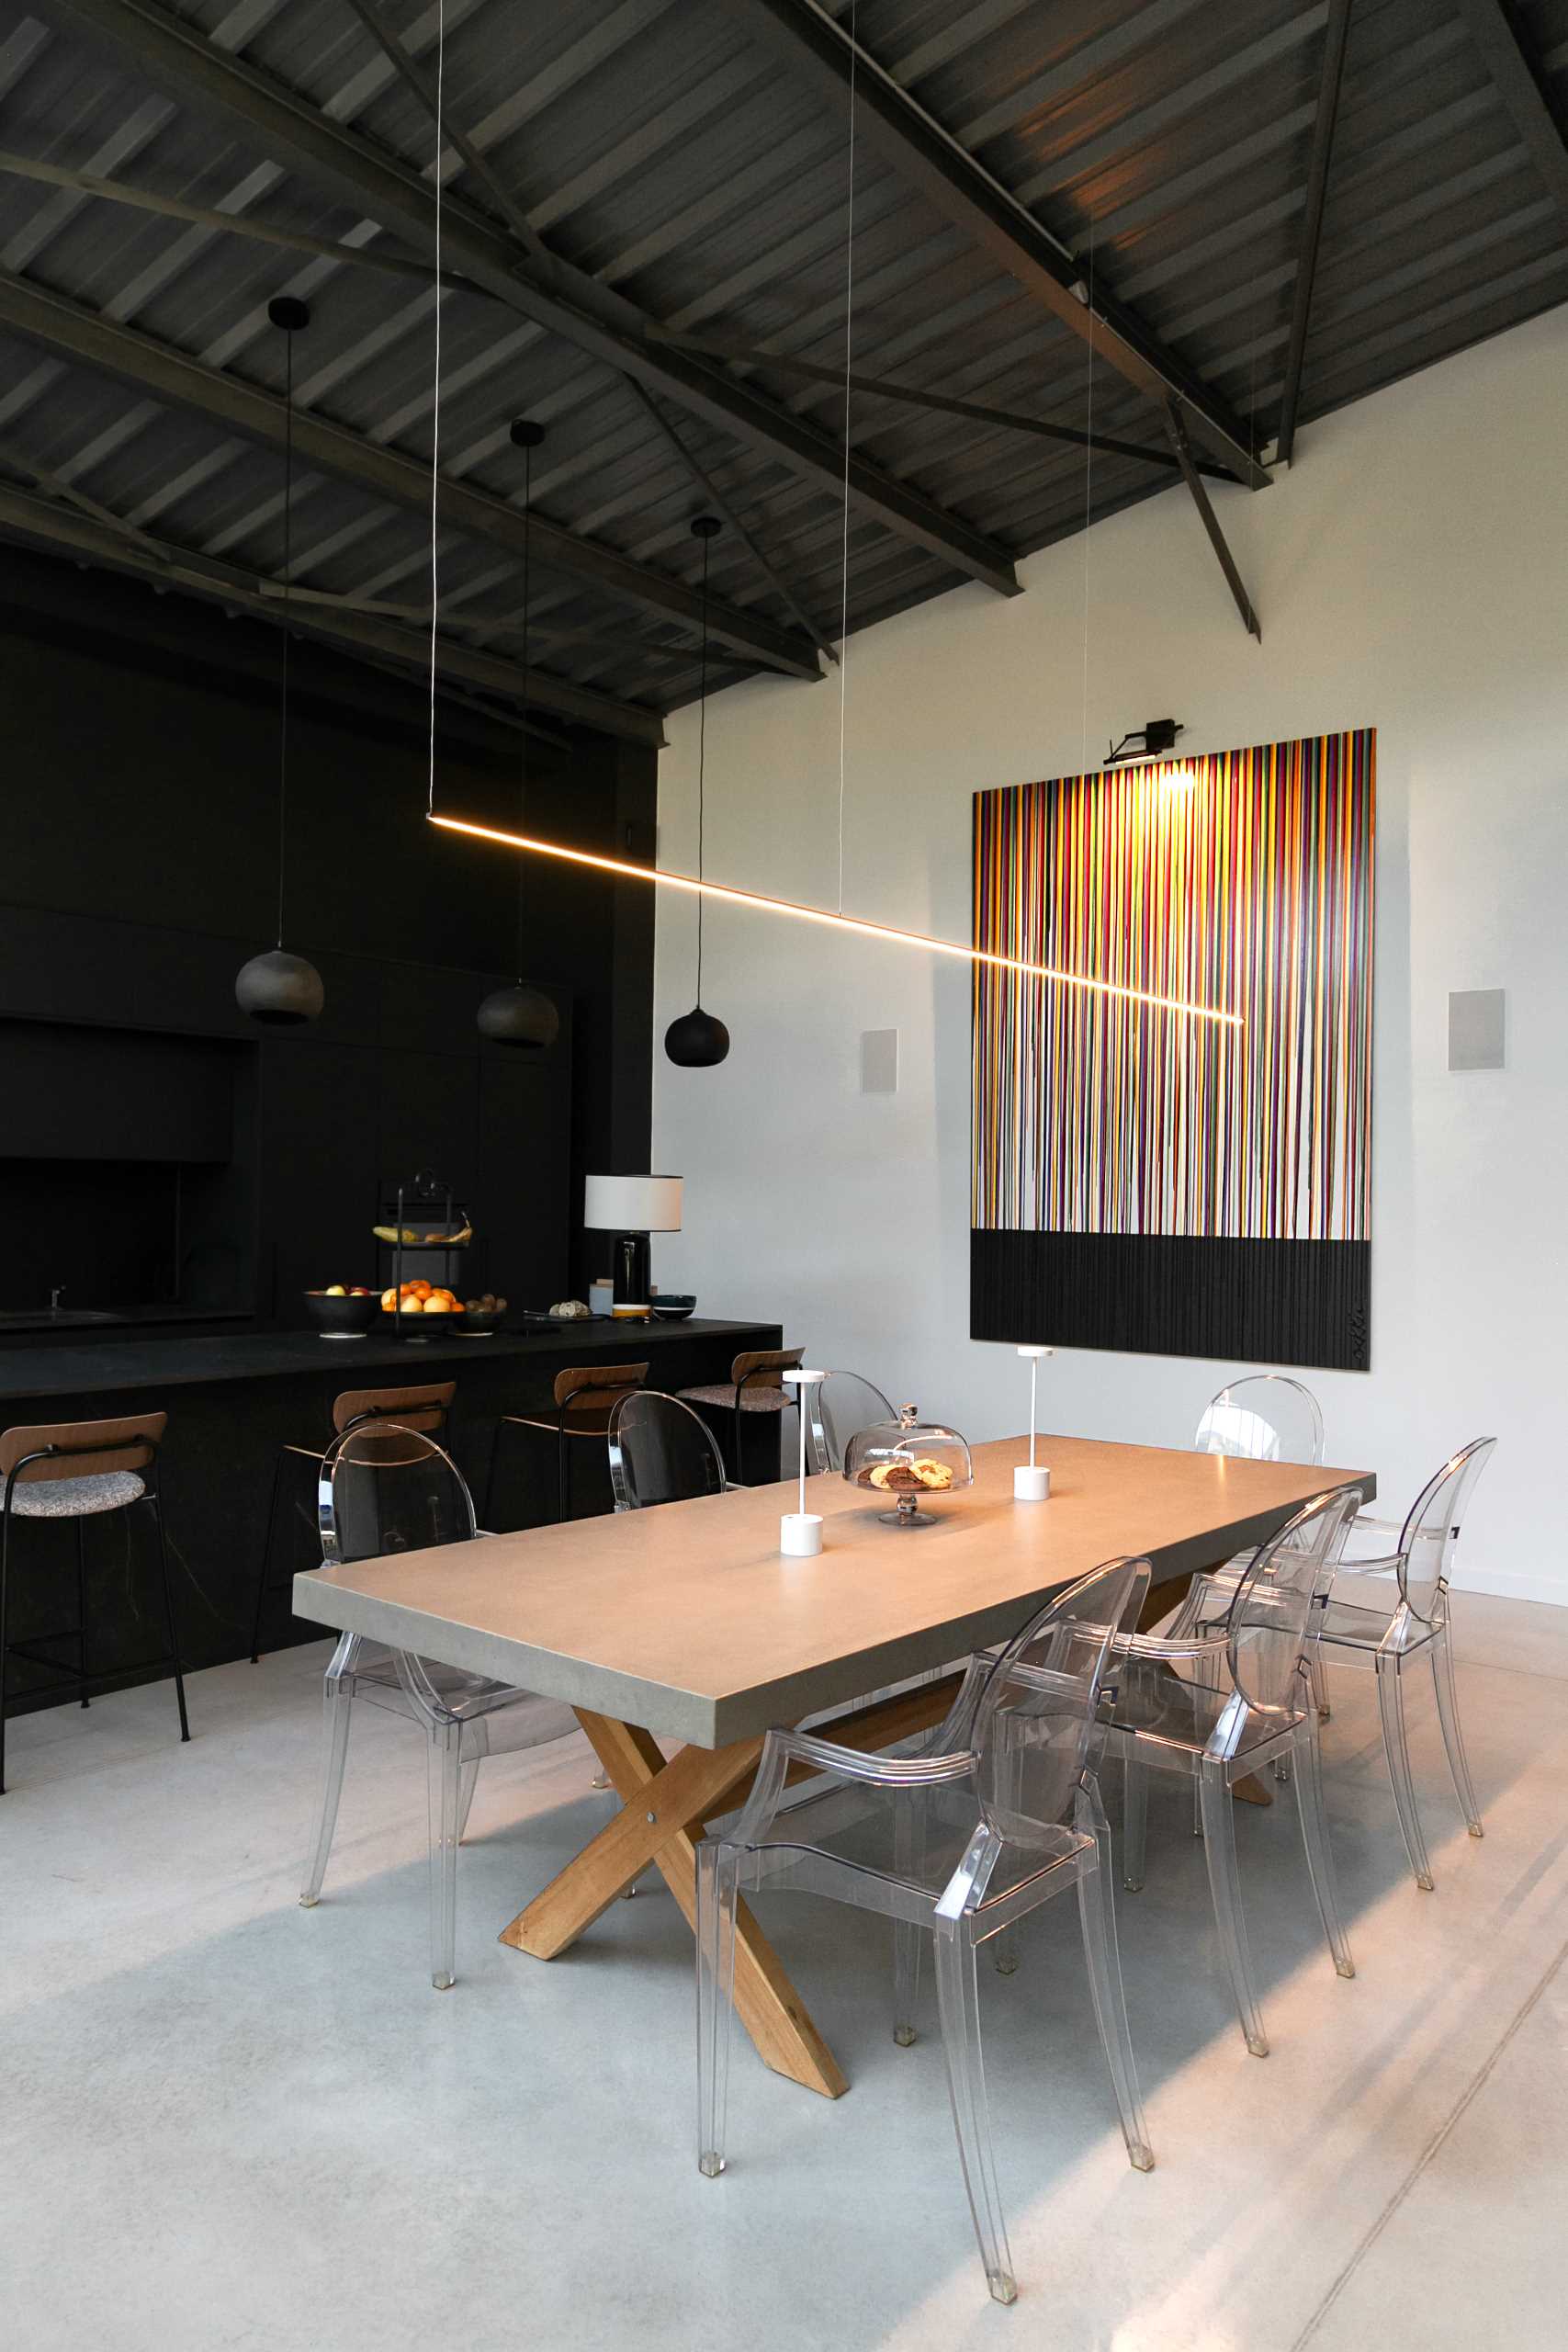 A warehouse conversion with a minimalist black kitchen and open plan dining area.